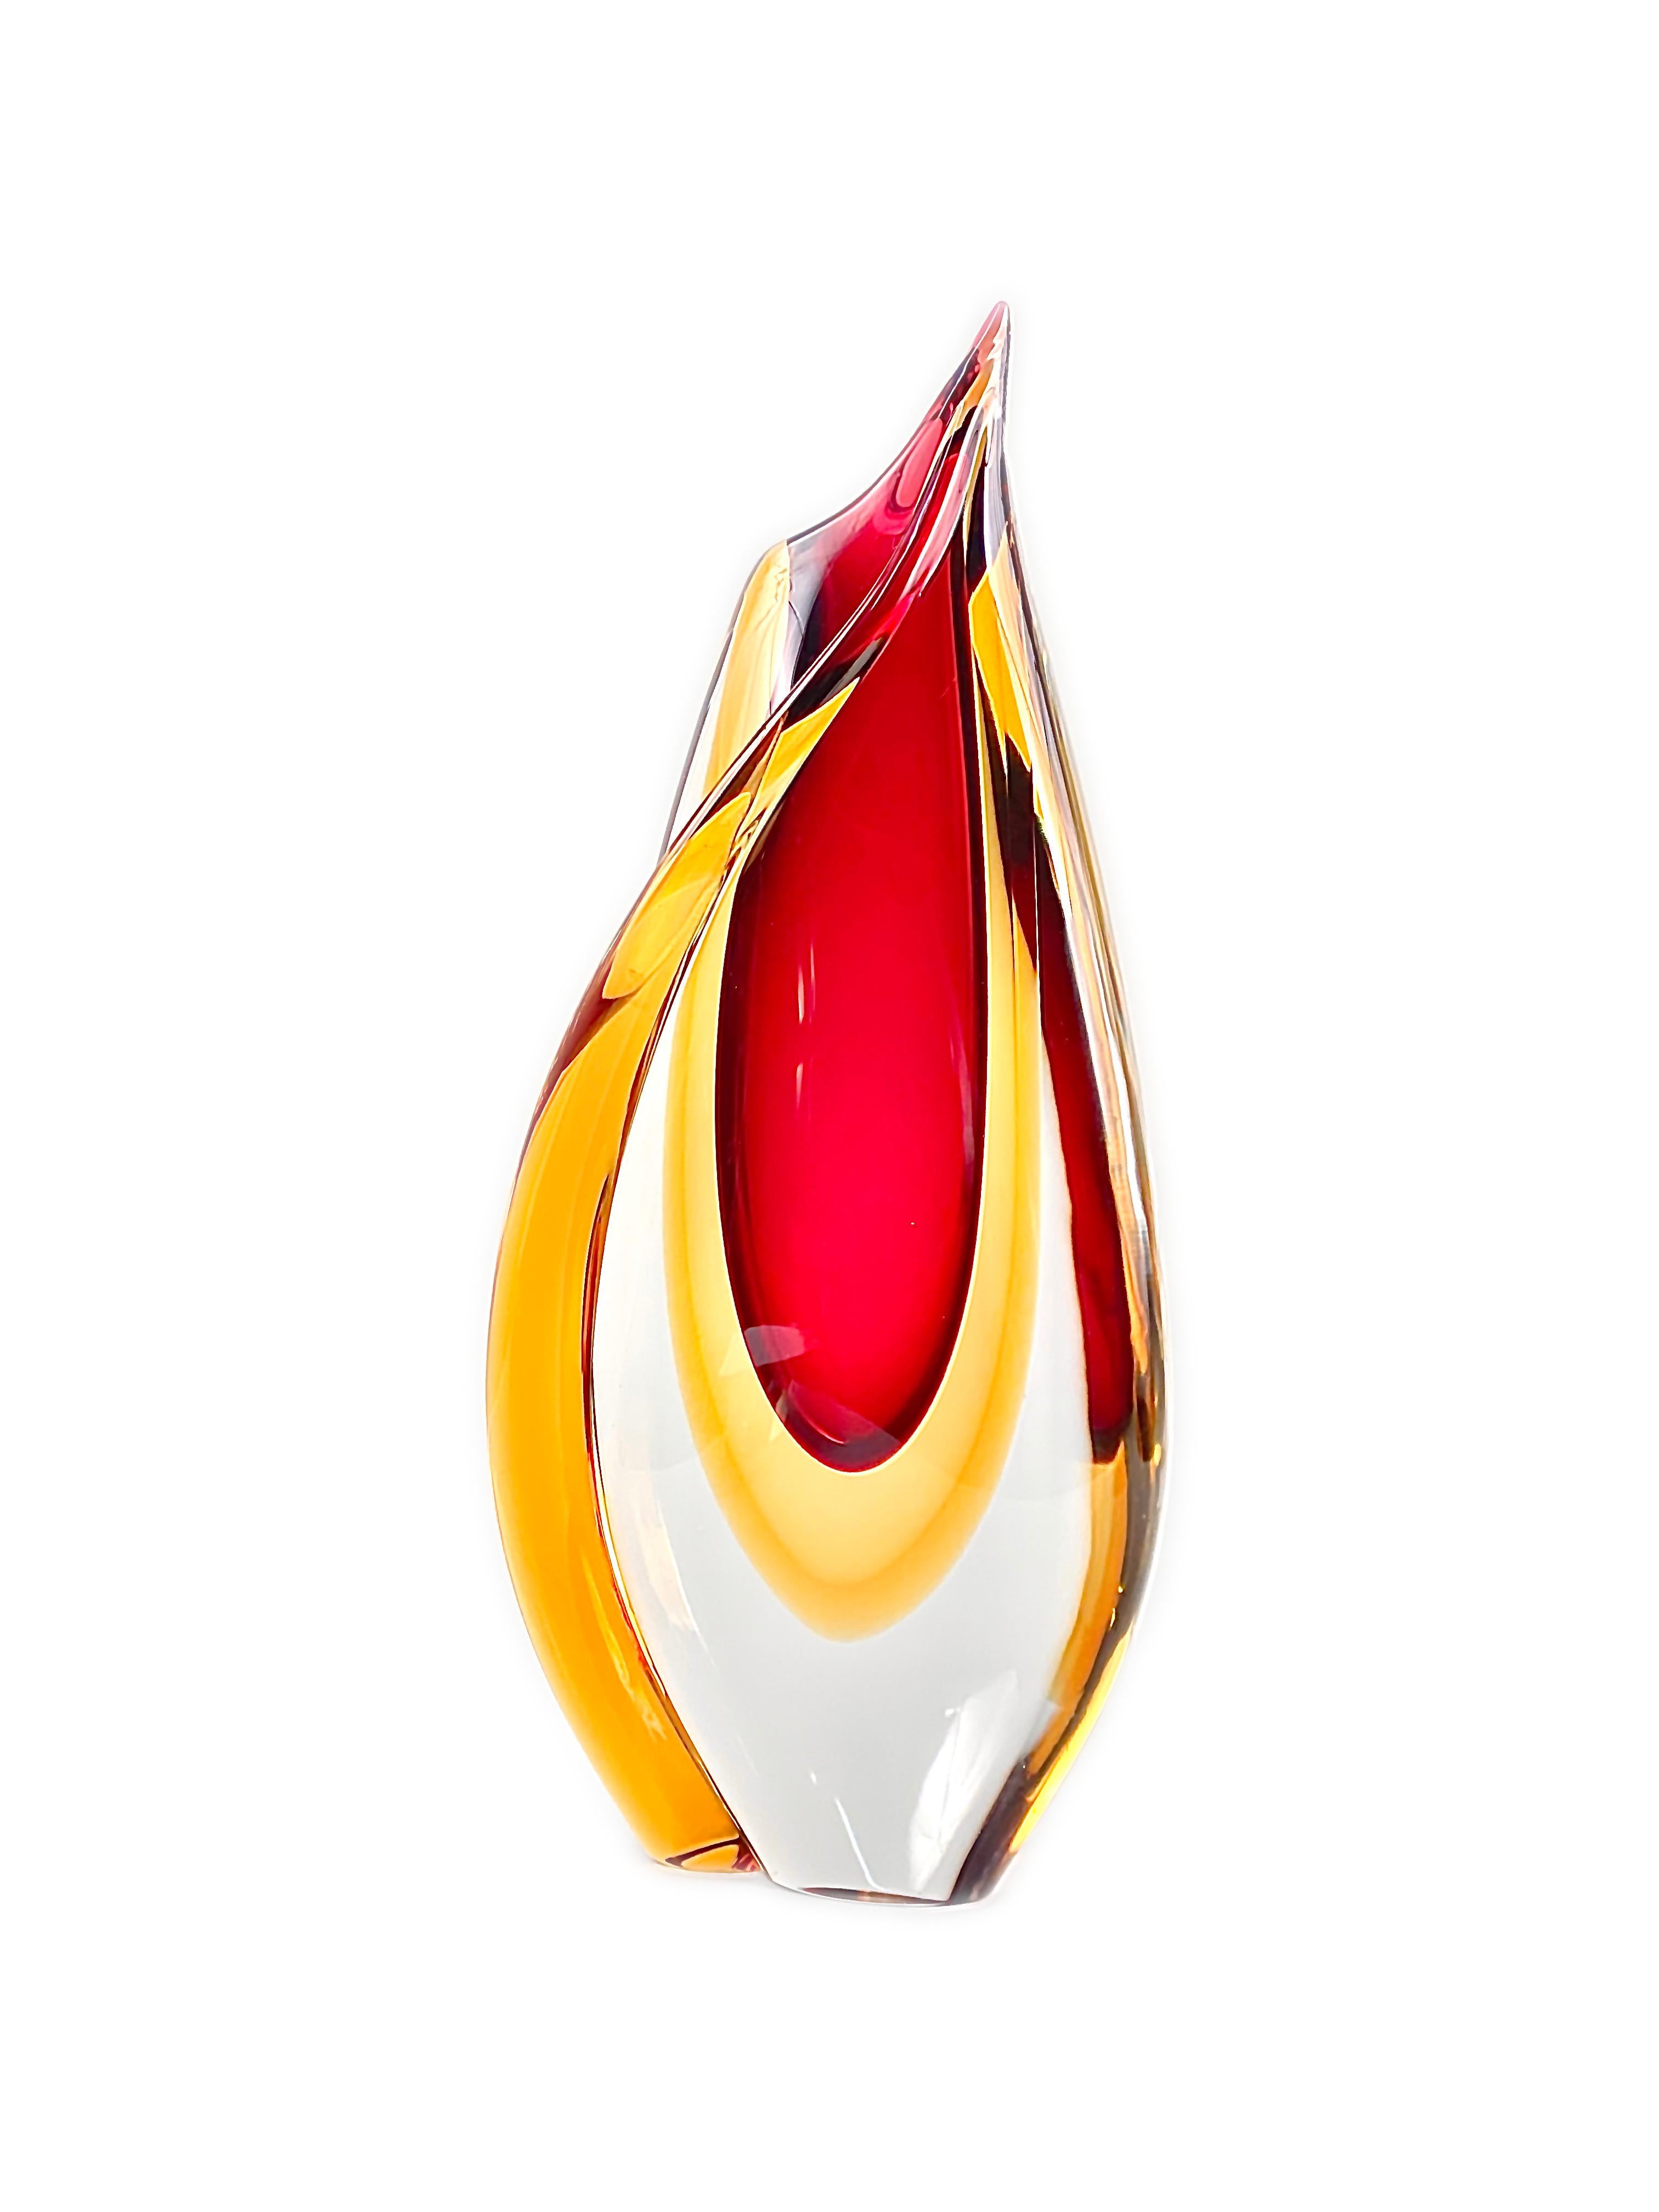 A modern Italian blown glass vase decorated in a Sommerso technique with multiple layers of glass in colors of red-yellow/gold decoration cased in a heavy clear glass layer produced by, Formia Vetri di Murano. The vase is artist-signed, but tough to